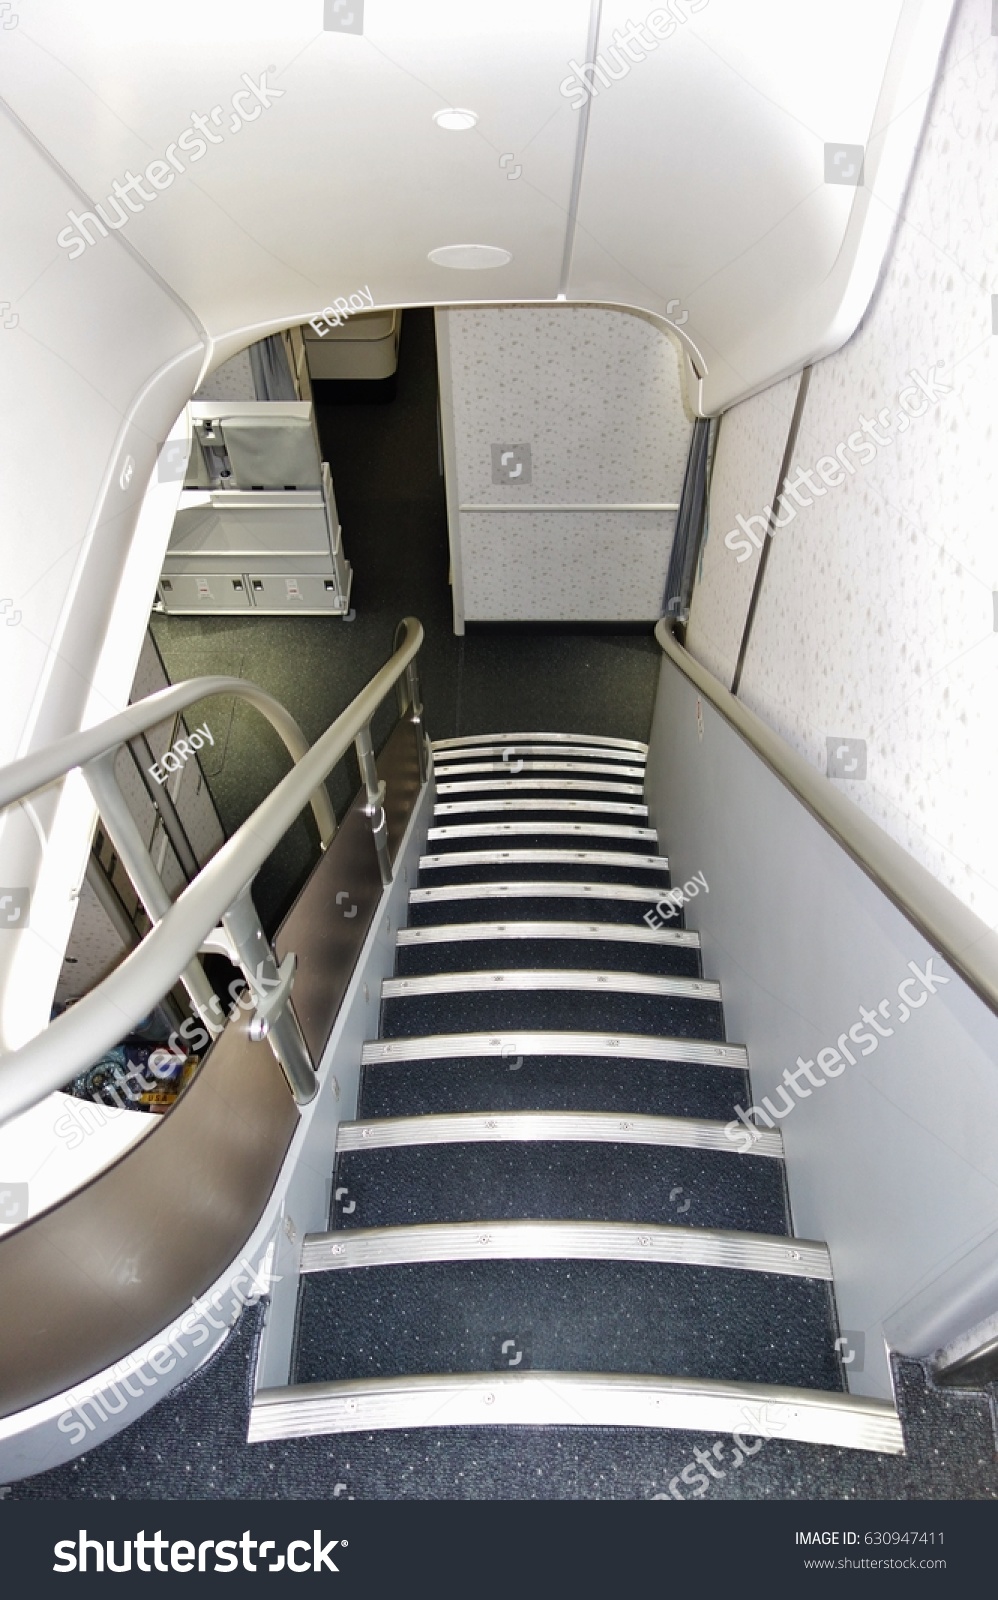 SEOUL, SOUTH KOREA -25 MAR 2017- View of the internal staircase inside a Boeing 747-8 airplane from Korean Airlines (KE). #630947411